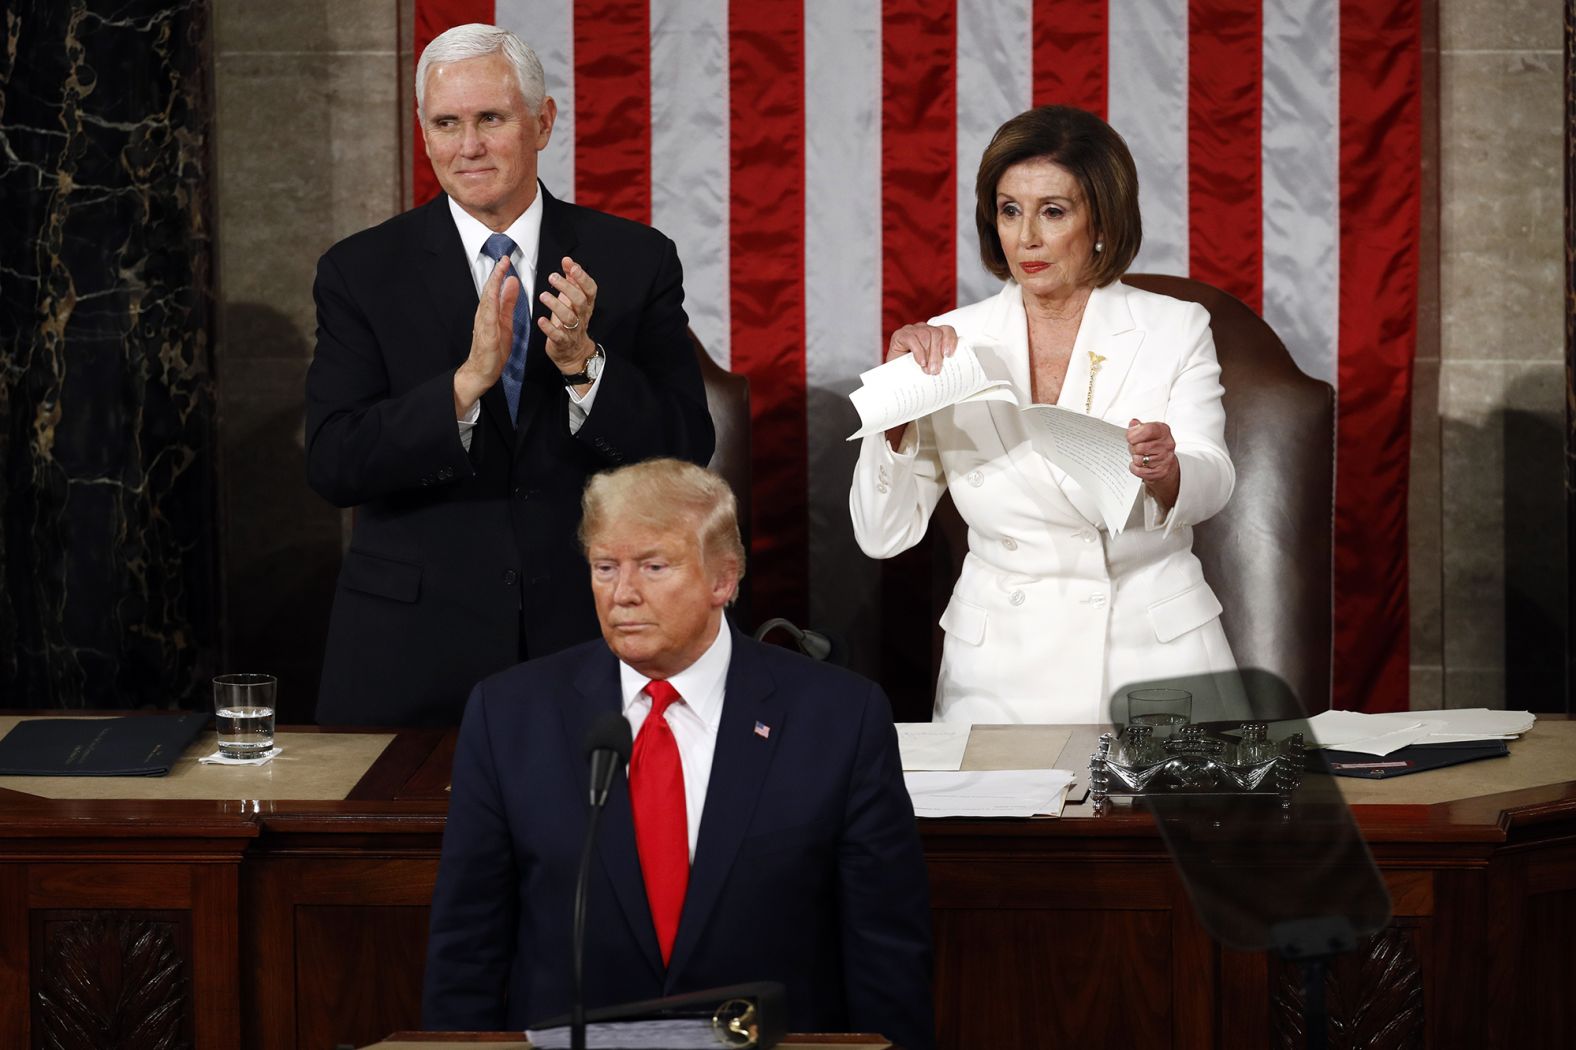 House Speaker Nancy Pelosi rips her copy of Trump's 2020 speech in half, encapsulating the toxic relationship between the Republican president and the Democratic speaker. The House had <a href="index.php?page=&url=https%3A%2F%2Fwww.cnn.com%2F2019%2F11%2F13%2Fpolitics%2Ftrump-impeachment-key-moments%2Findex.html" target="_blank">recently impeached Trump</a> for his conduct regarding Ukraine, though he would be acquitted by the GOP-led Senate the next day. 